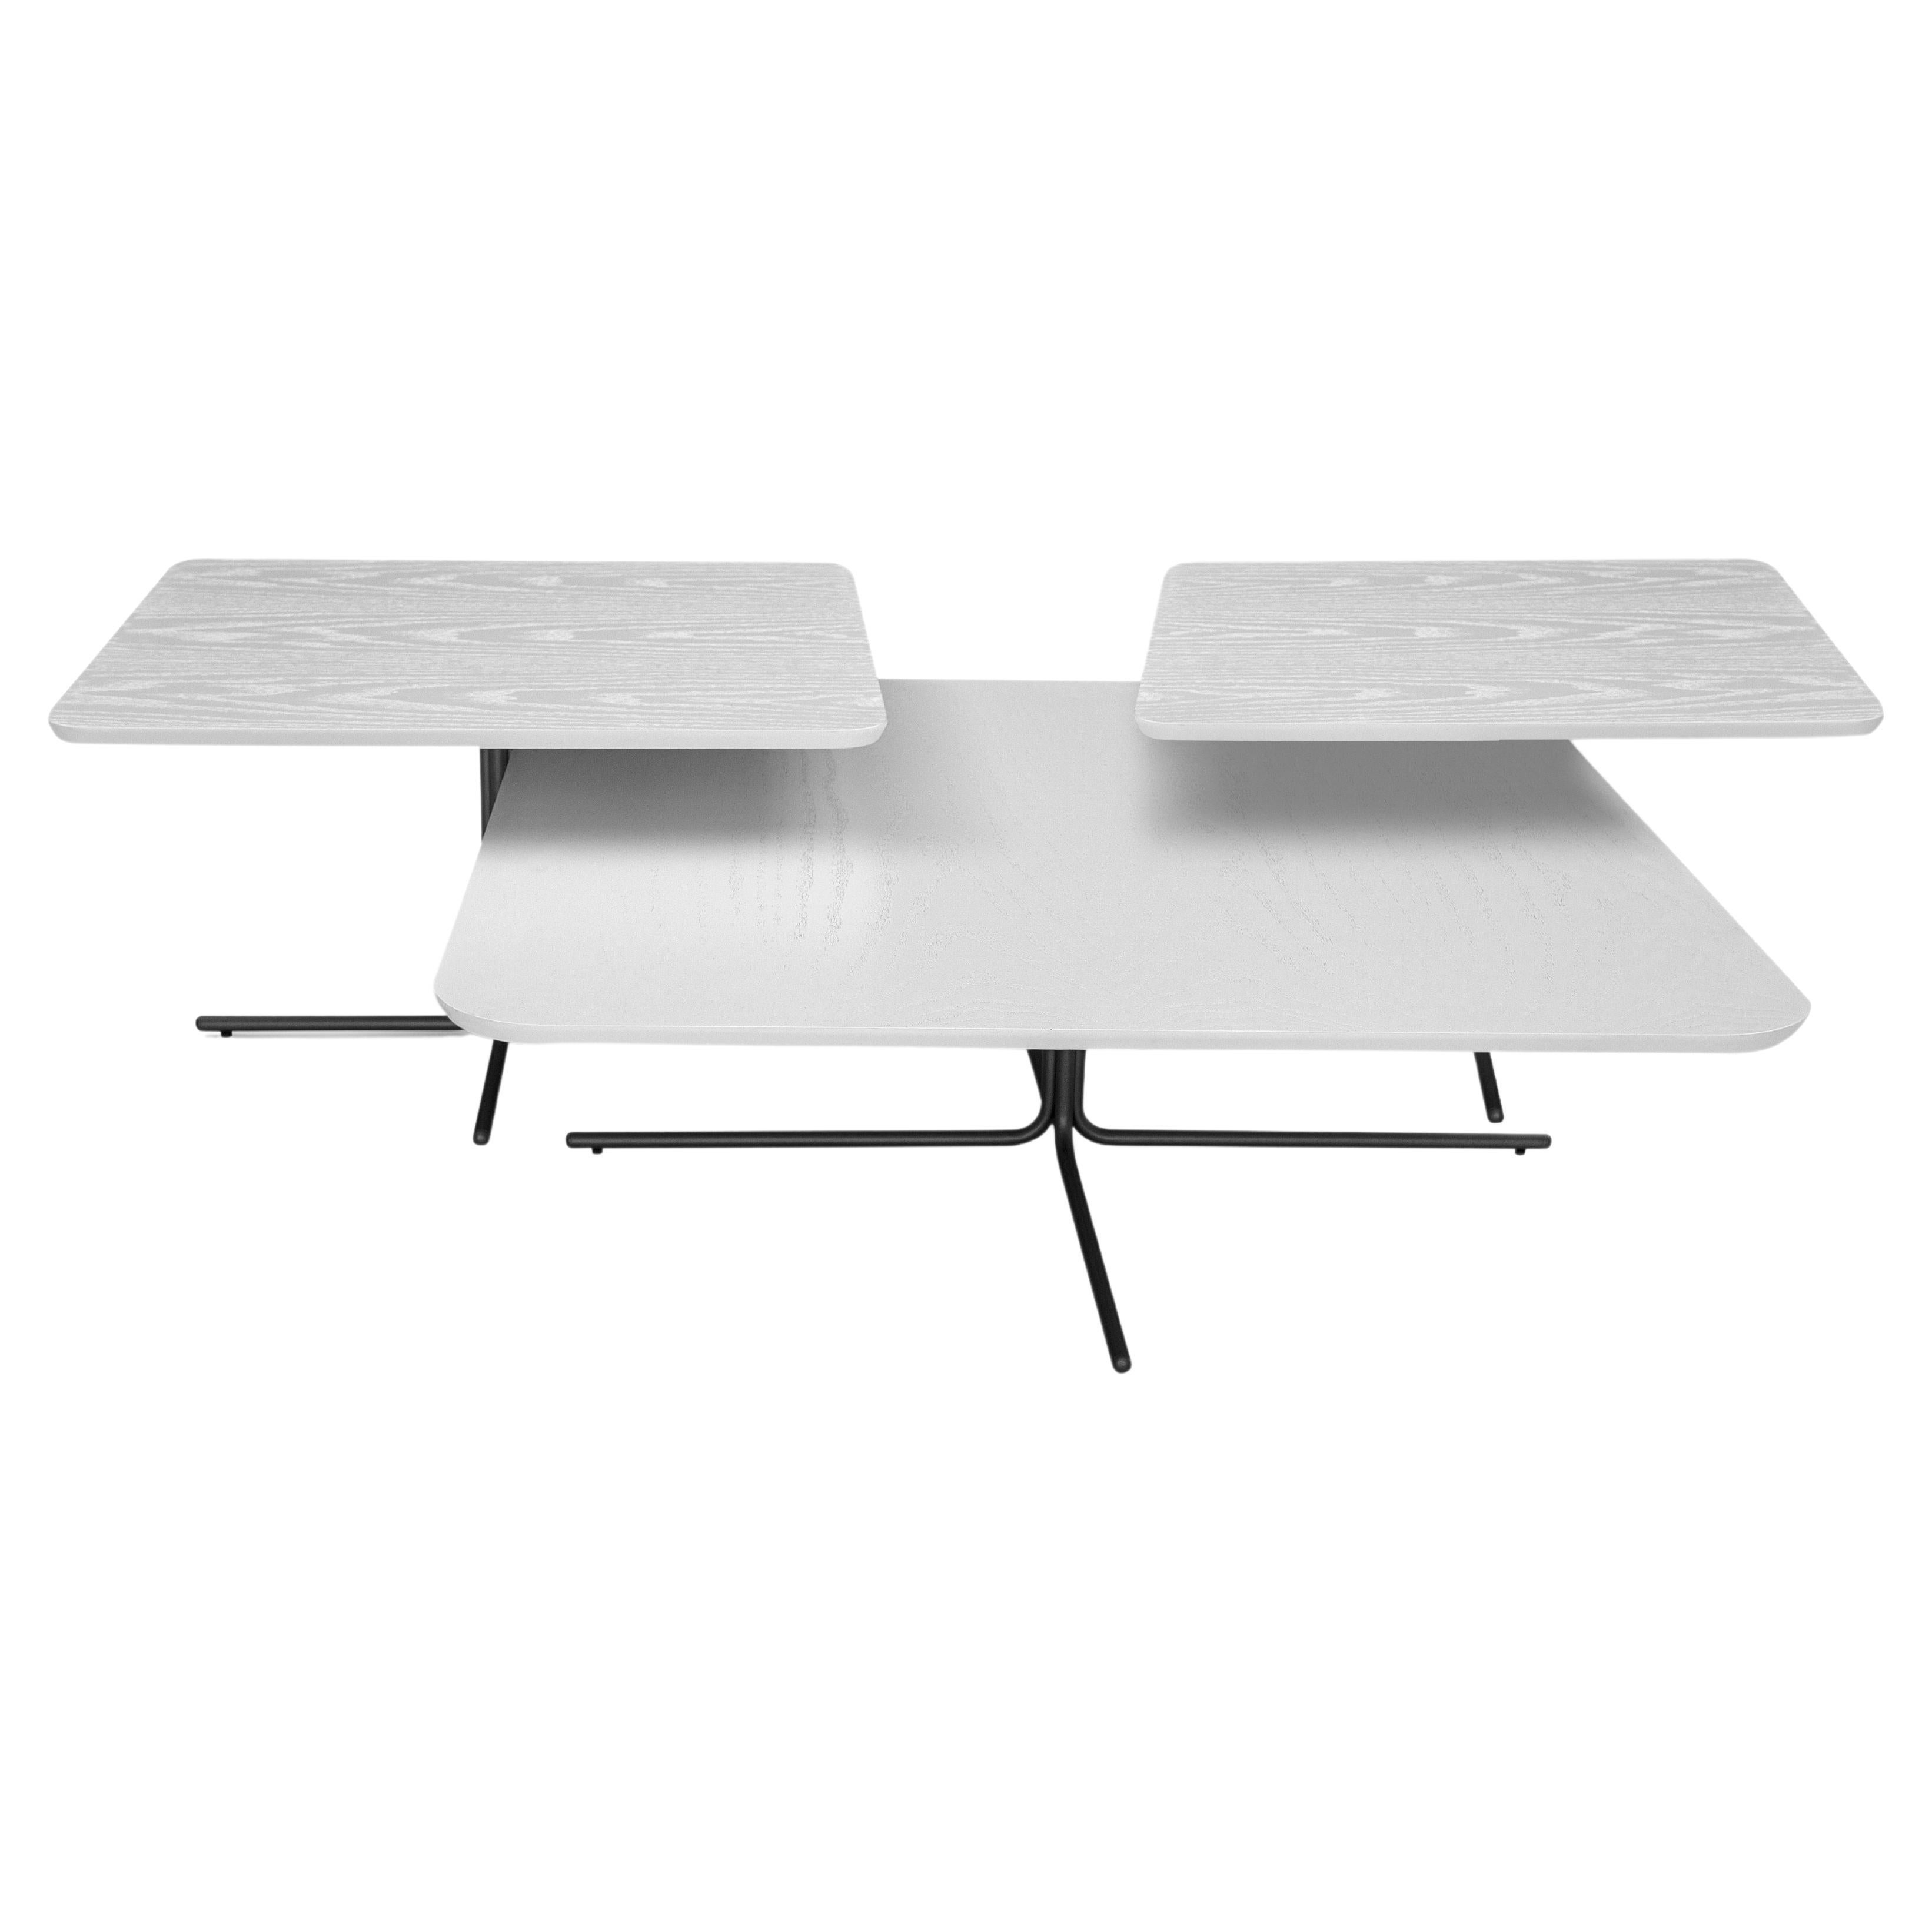 Plato Coffee Table in White Oak Wood and Graphite Finish, Set of 3 For Sale